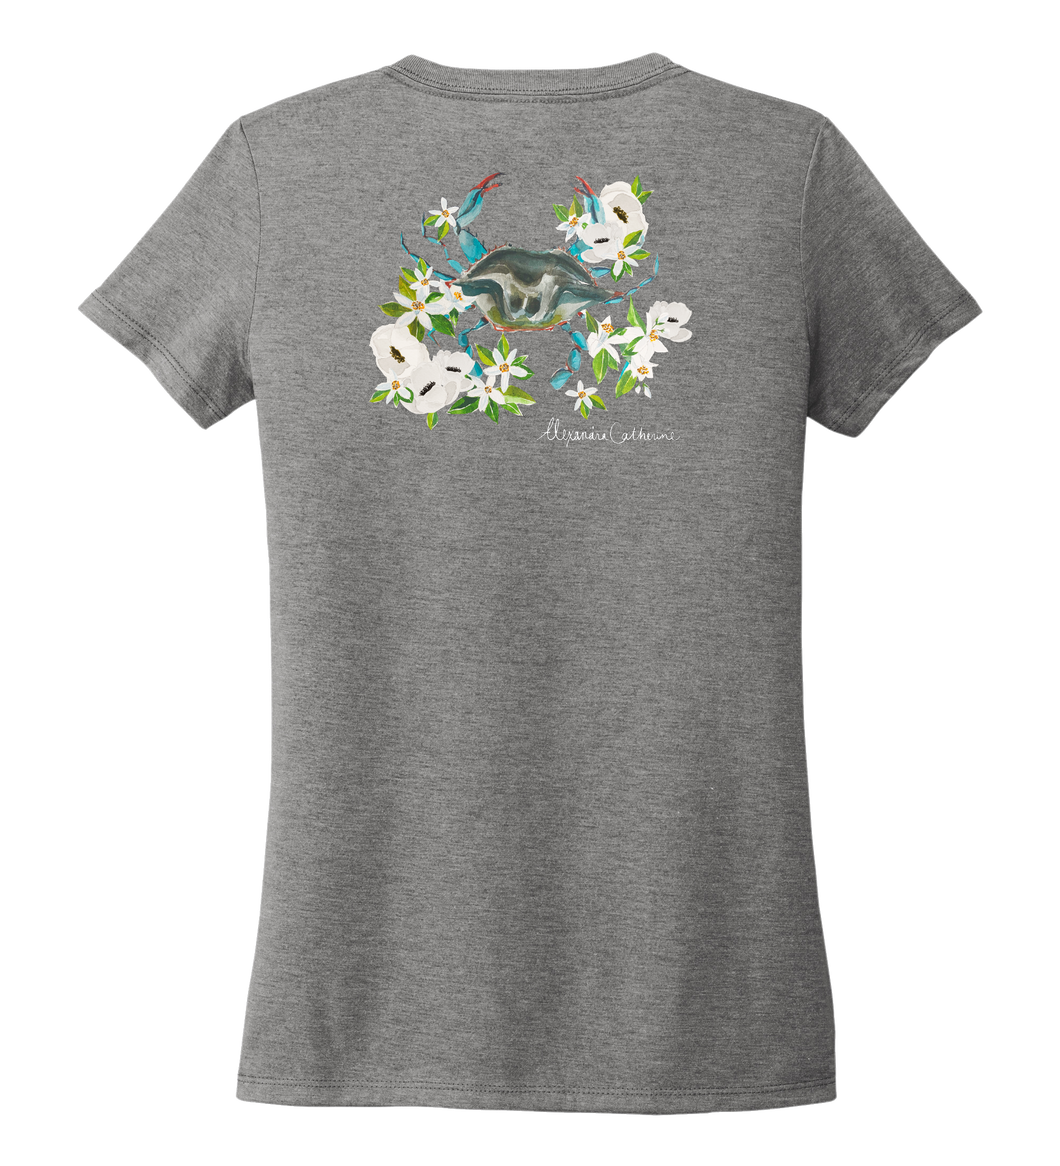 Alexandra Catherine, Blue Crab, Women's V-neck T-shirt in Oyster Grey